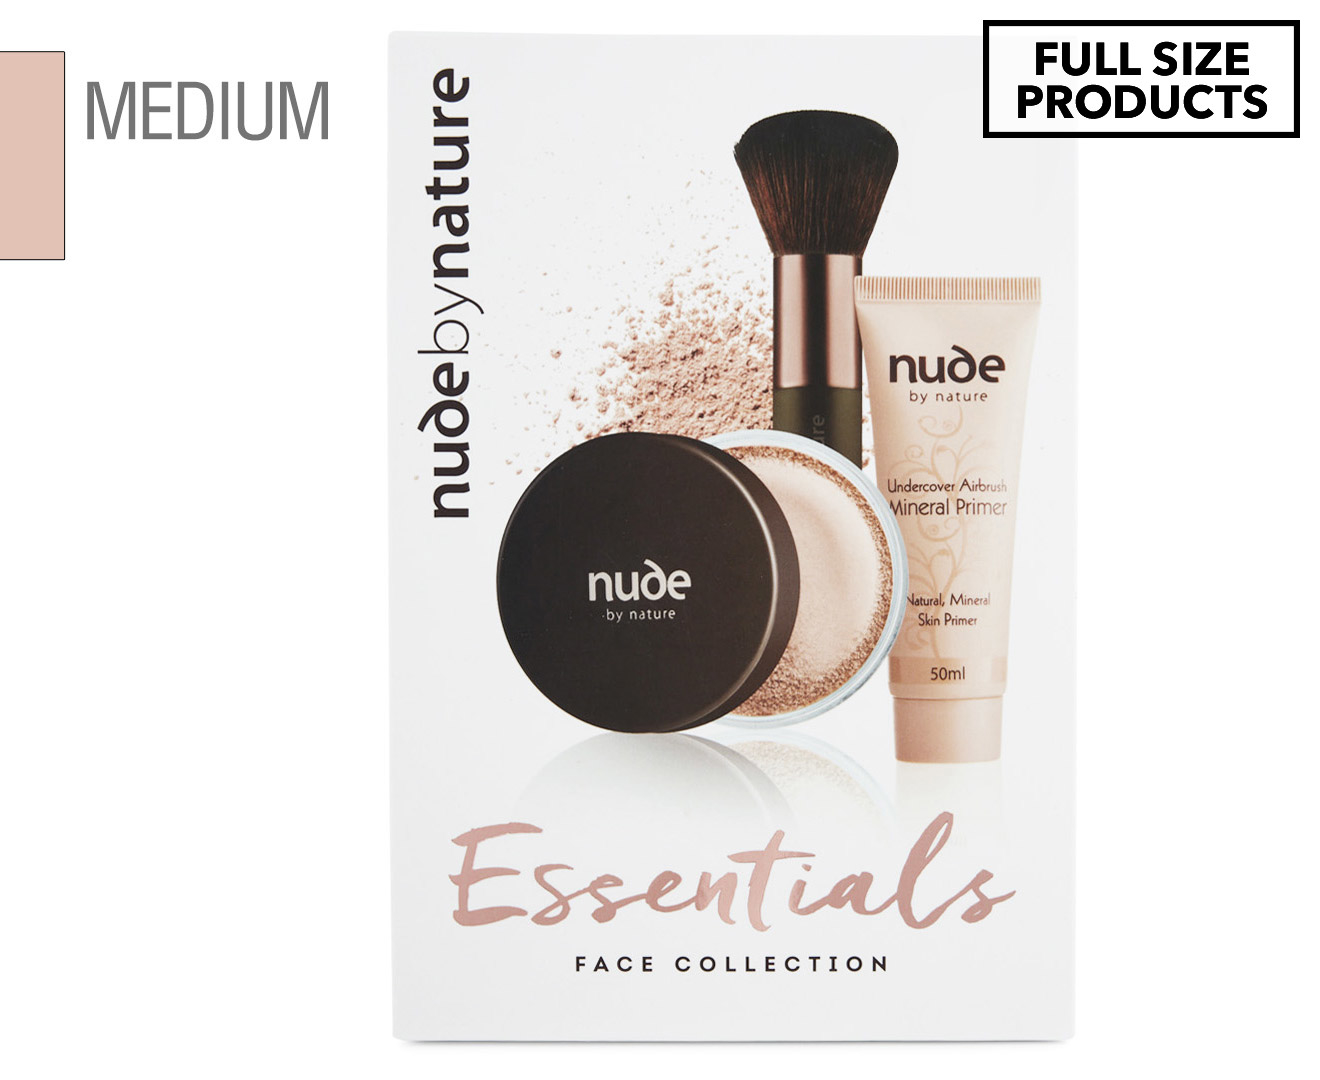 Nude by Nature Essential Face Collection - Medium